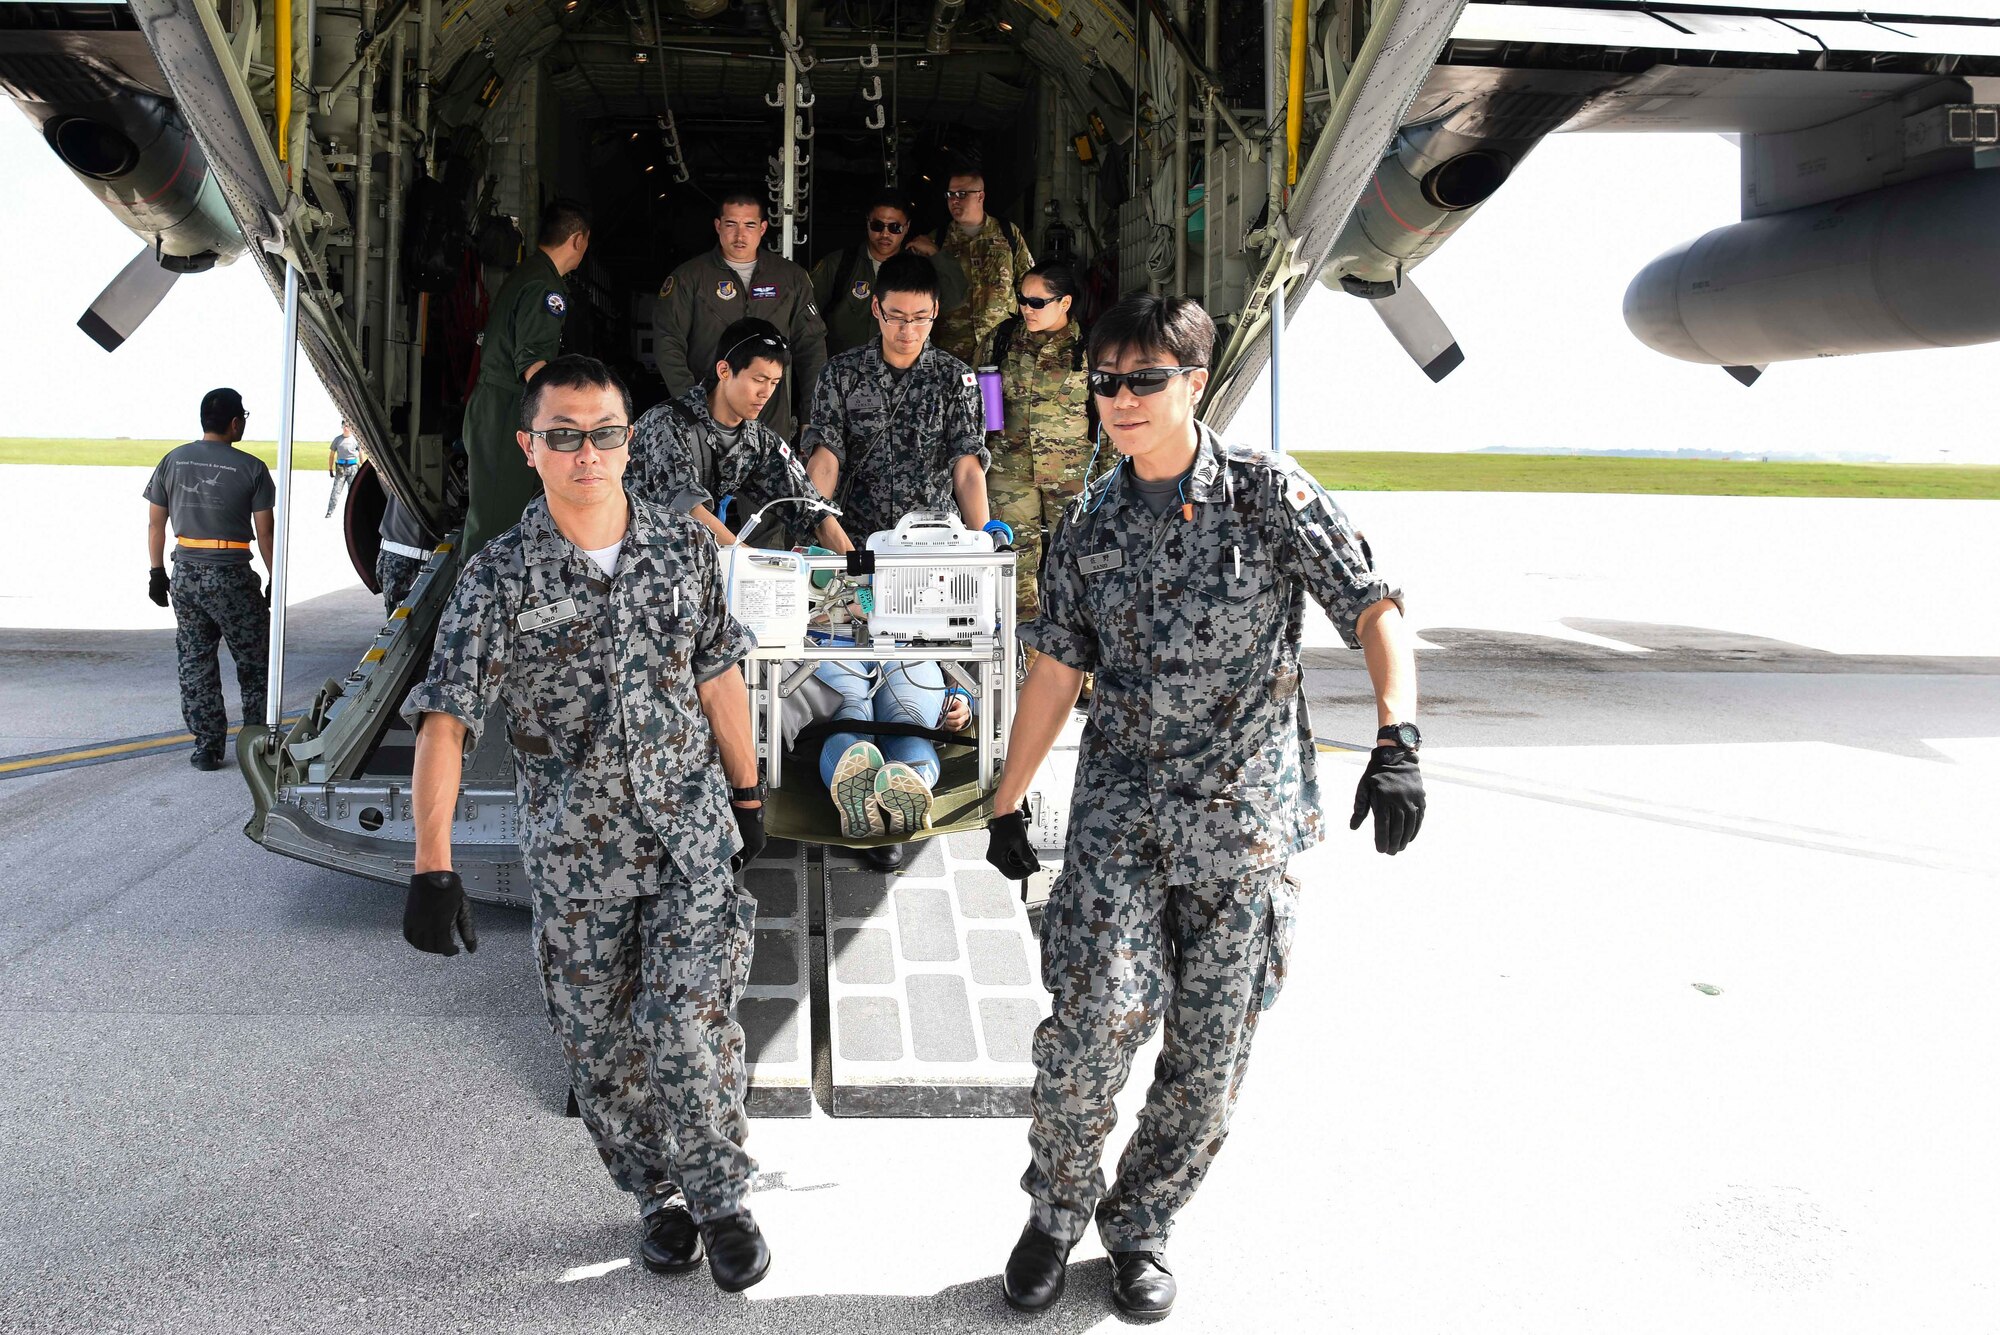 Medical service members from the Japan Air Self-Defense Force perform simulated emergency medical care and transportation on U.S. Airman 1st Class Kelly Destiny, 36 Mobility Response Squadron Air Transportation apprentice, during an exercise scenario for Cope North 2019, Feb. 27, 2019, at Andersen Air Force Base, Guam. Service members from the U.S., Royal Australian Air Force, and the Japan Air Self-Defense Force exercised their Humanitarian Assistance and Disaster Relief skills together on Tinian by providing emergency medical care and secure transportation for simulated patients. (U.S. Air Force photo by Tech. Sgt. Jake Barreiro)